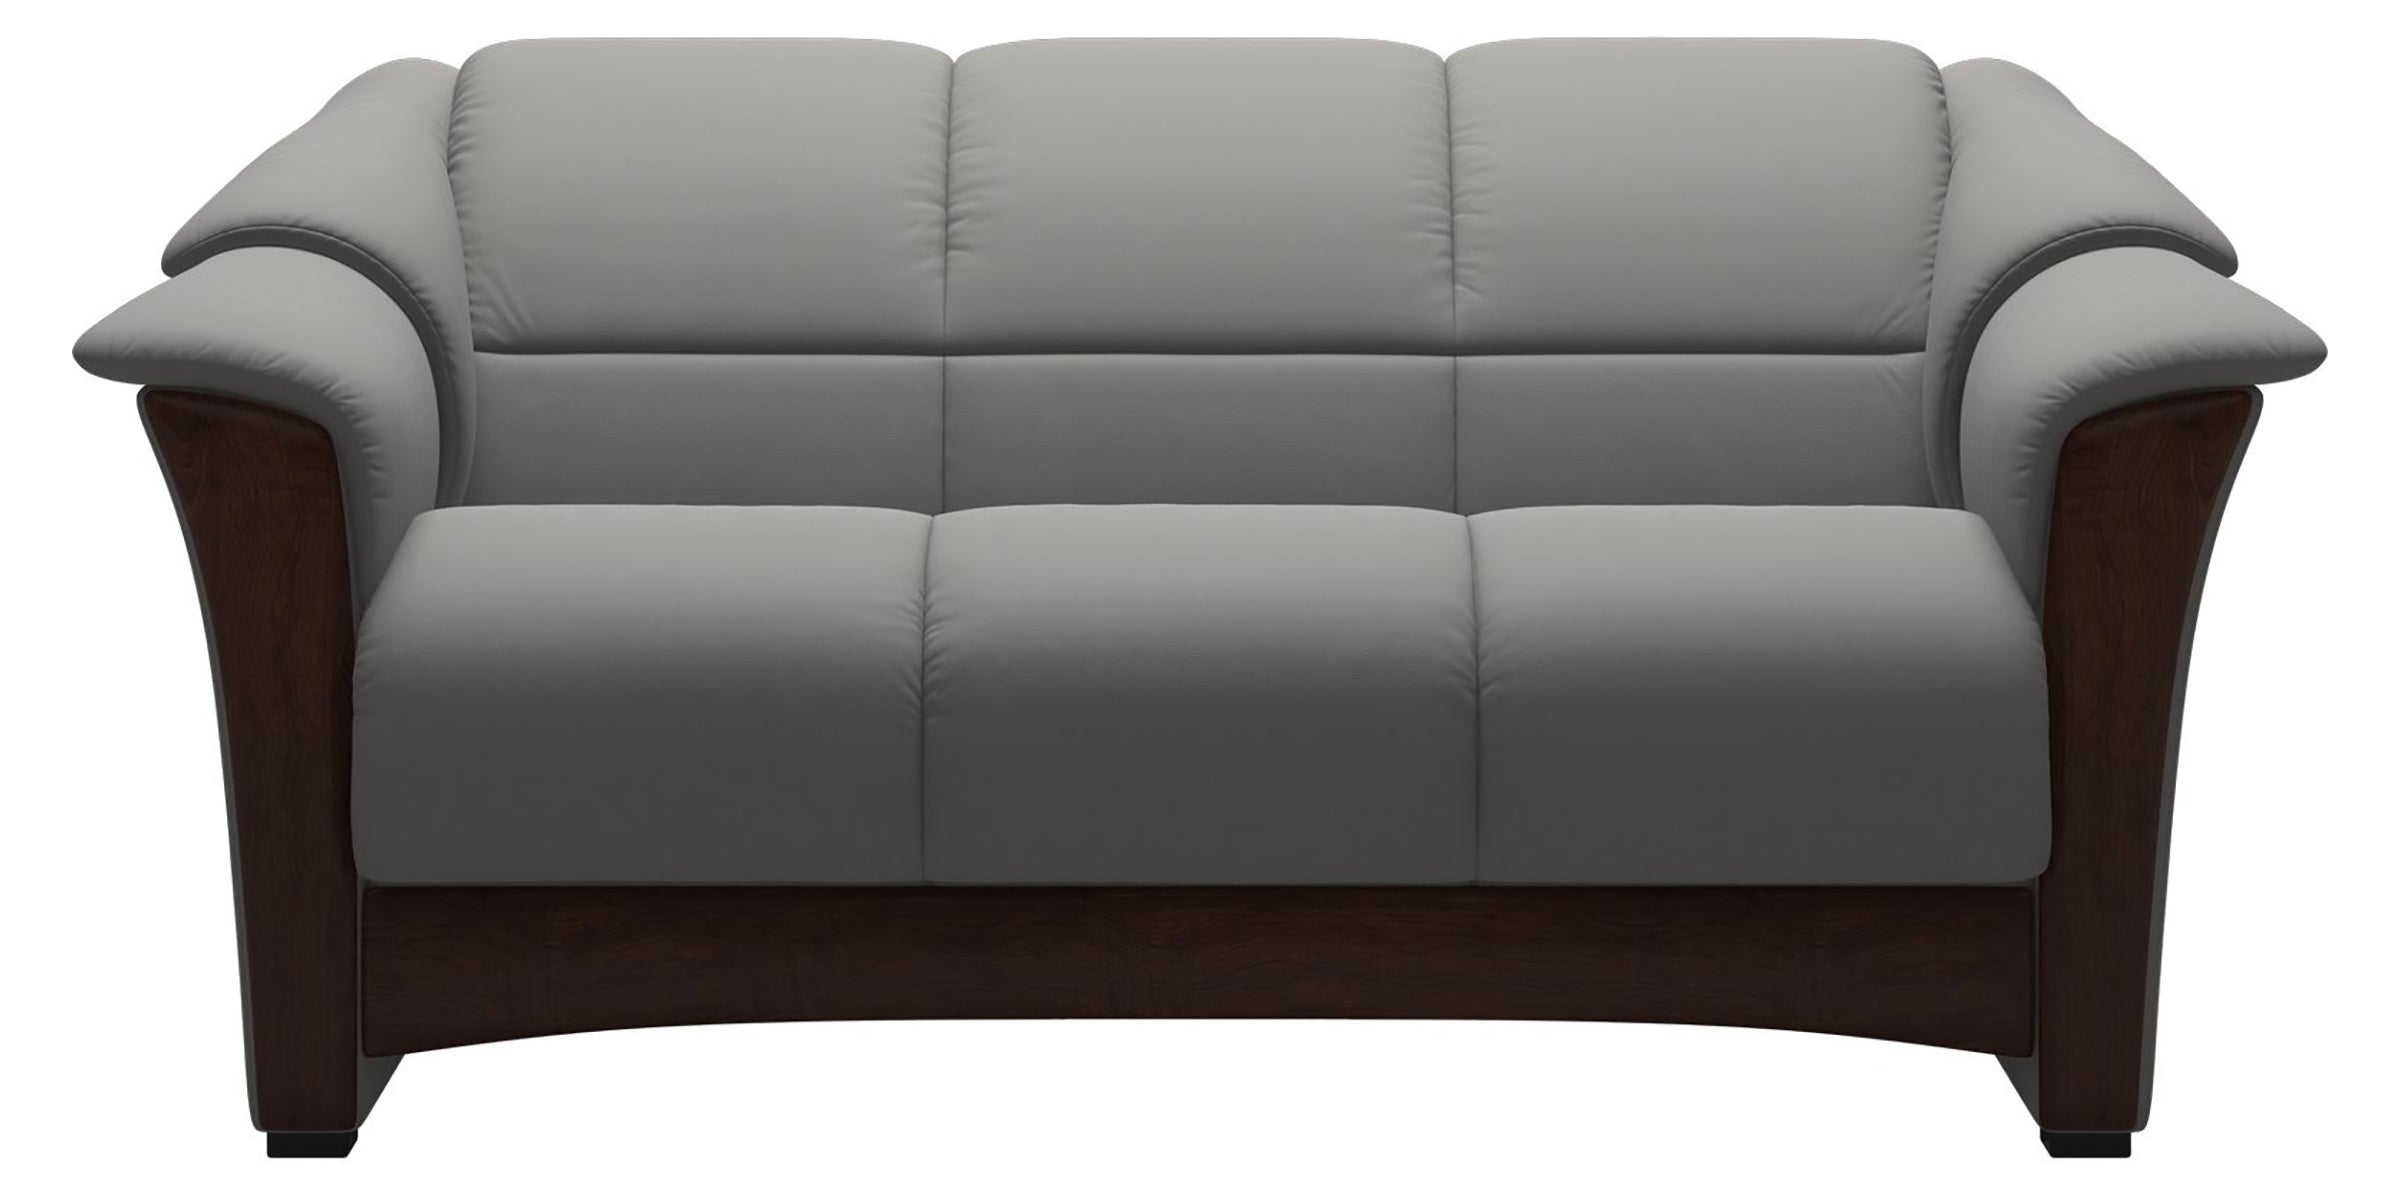 Paloma Leather Silver Grey and Brown Base | Stressless Oslo Loveseat | Valley Ridge Furniture